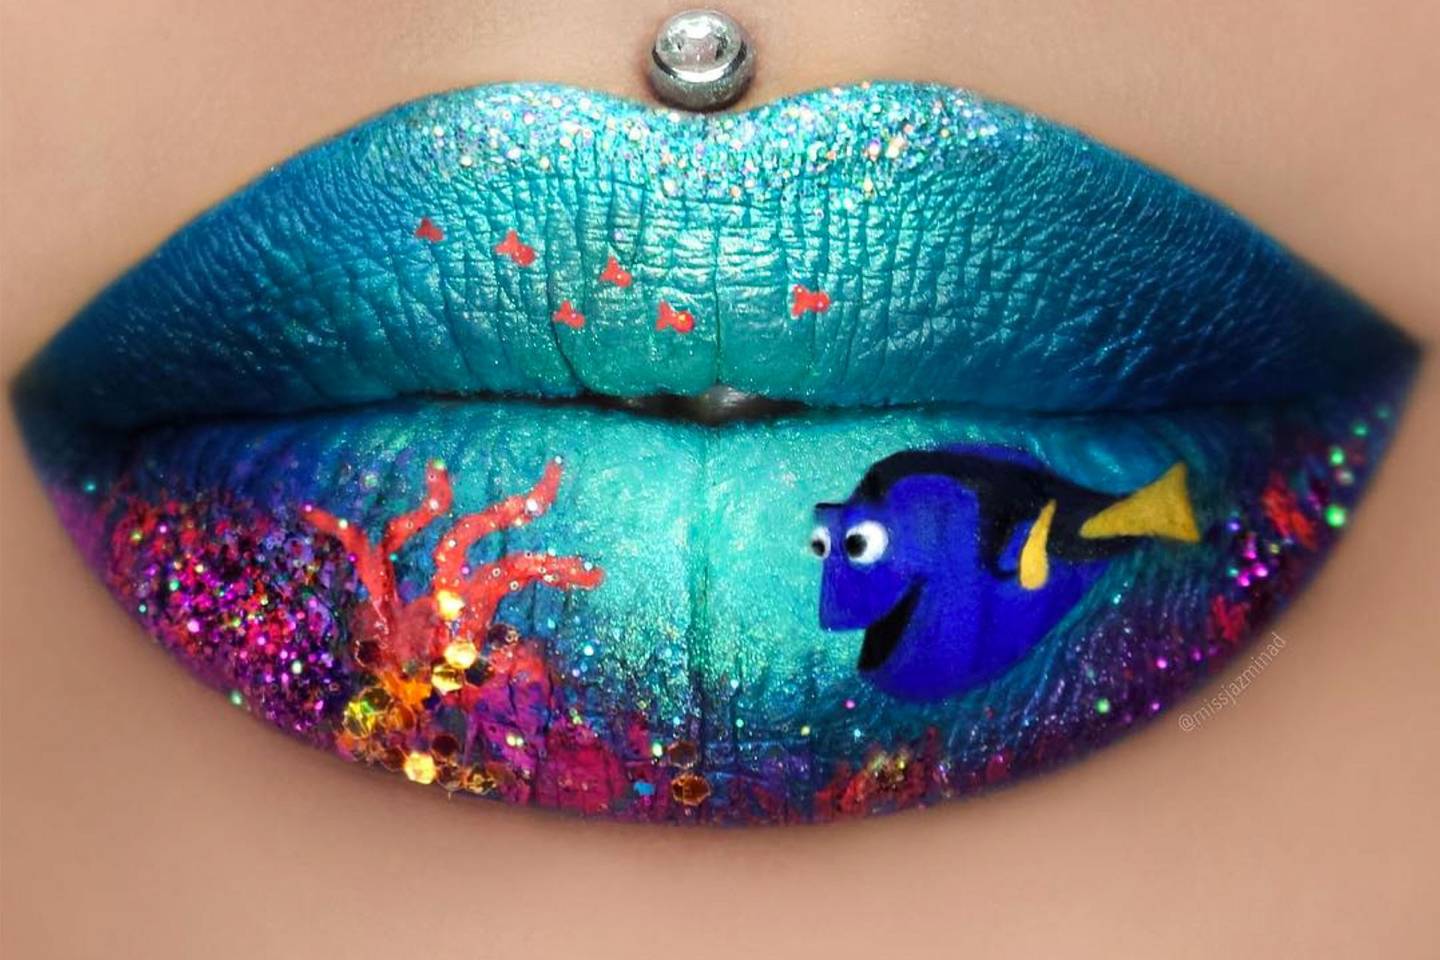 3. Nail and Lip Art Designs - wide 7